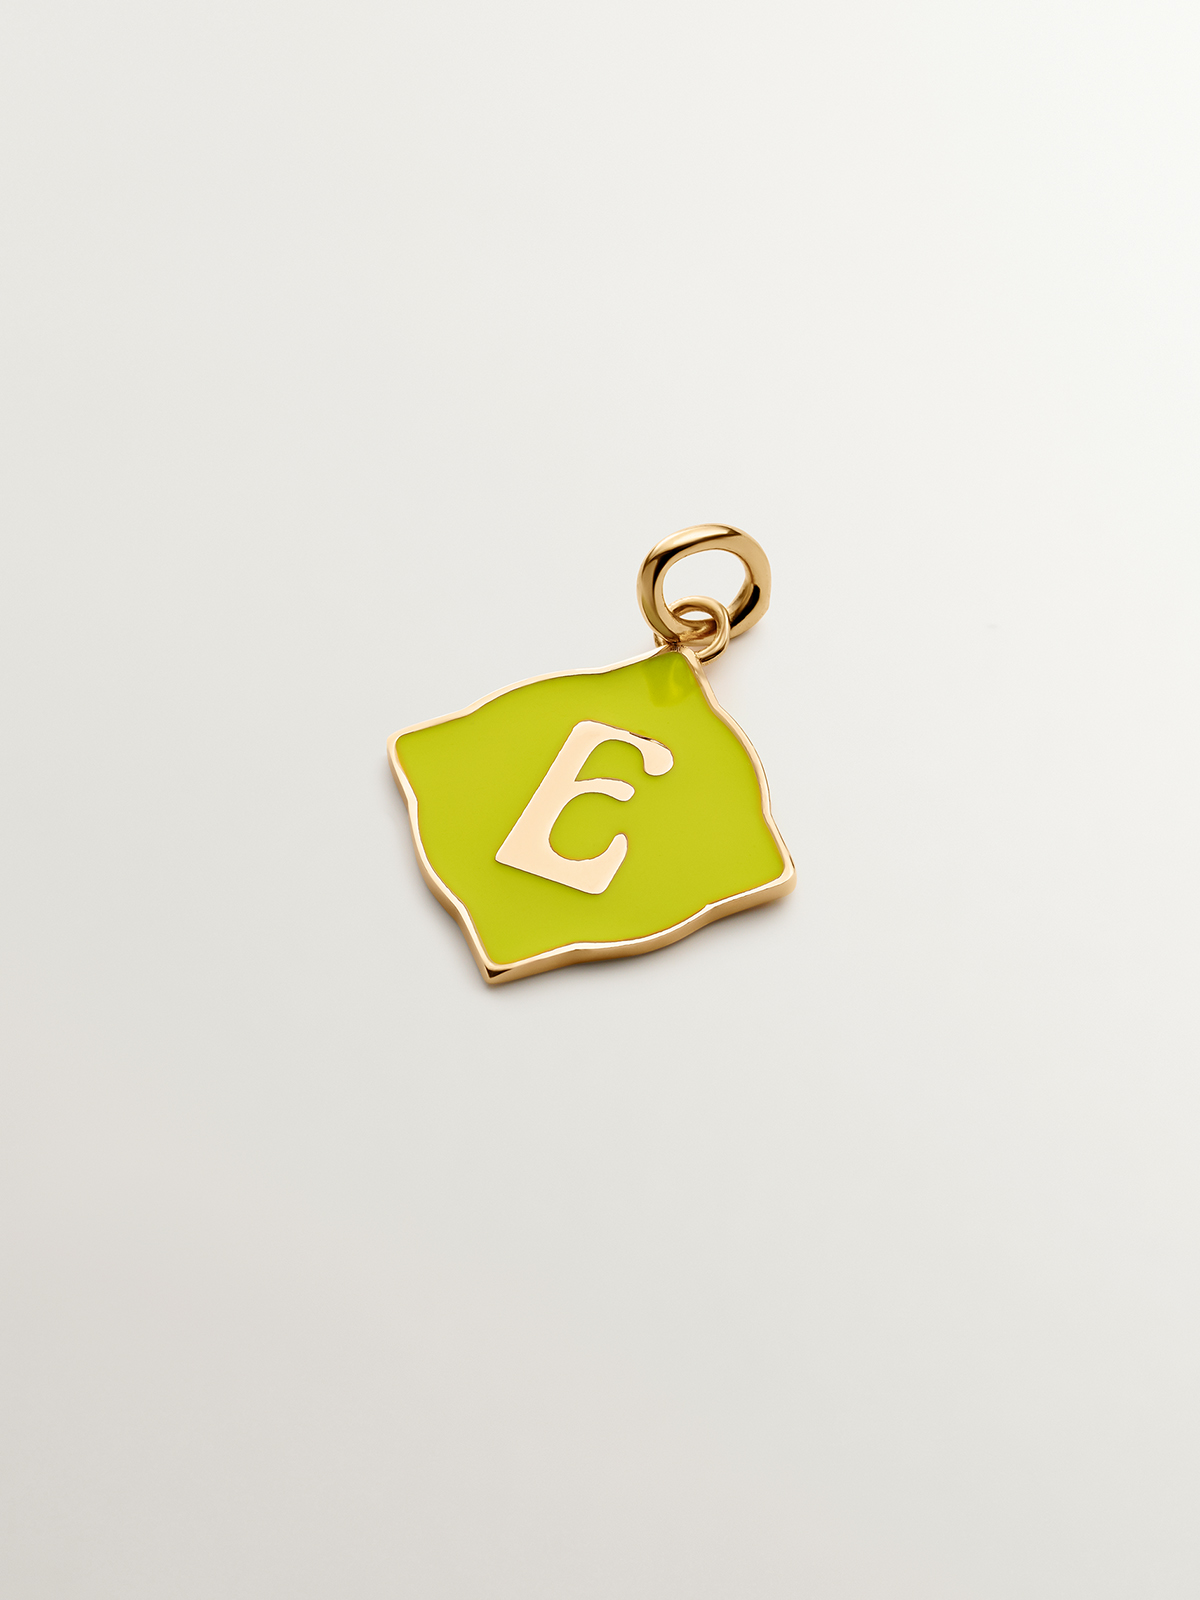 Charm in 925 sterling silver plated in 18K yellow gold with initial E and yellow enamel with irregular diamond shape